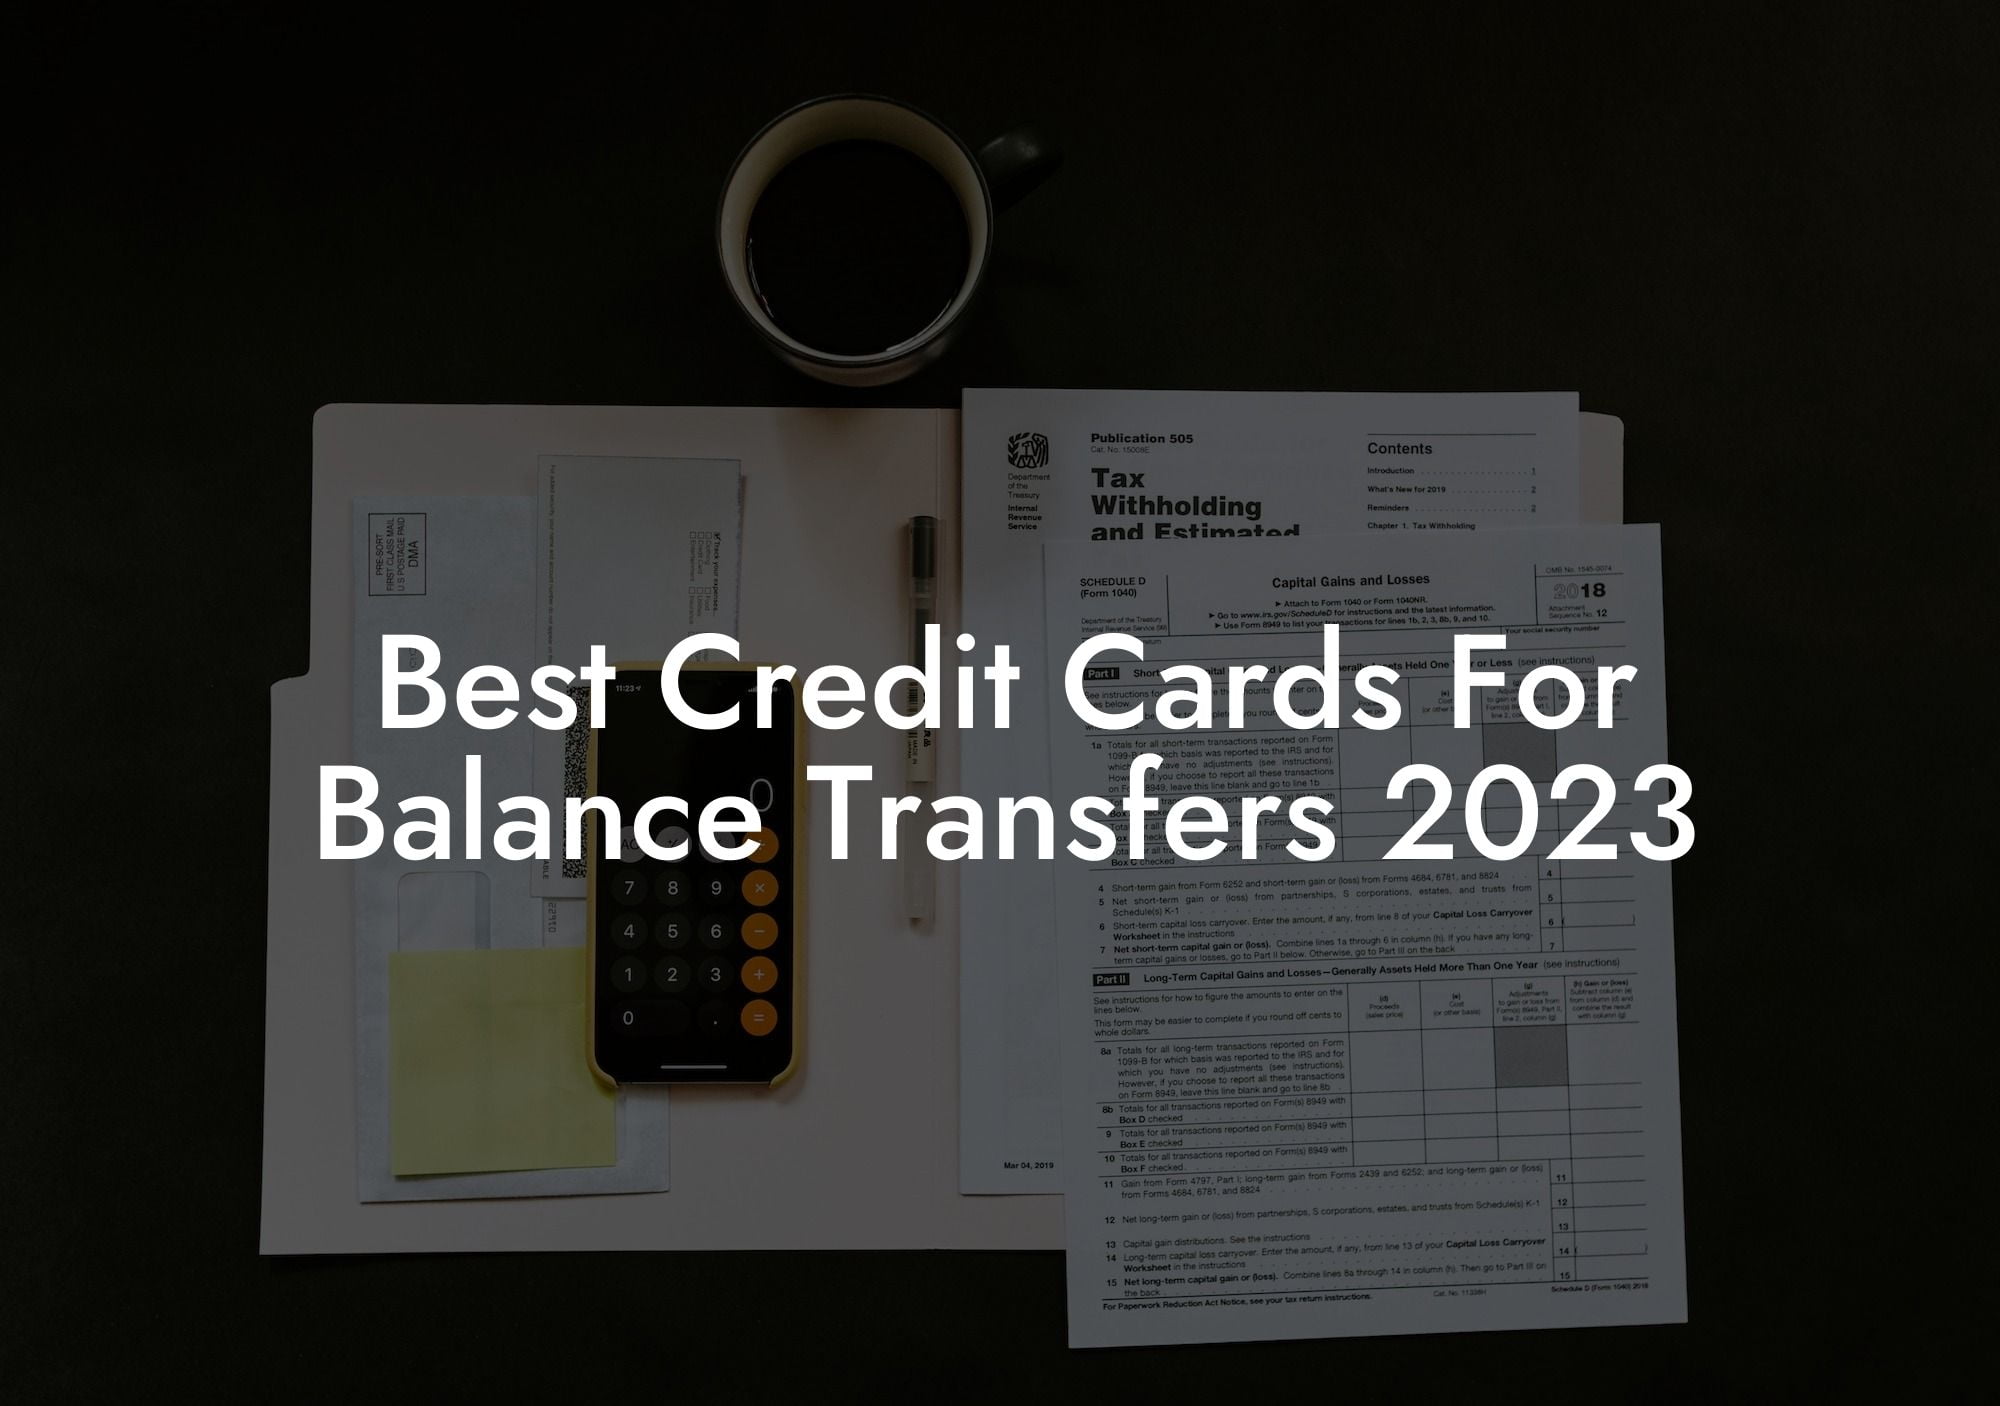 Best Credit Cards For Balance Transfers 2023